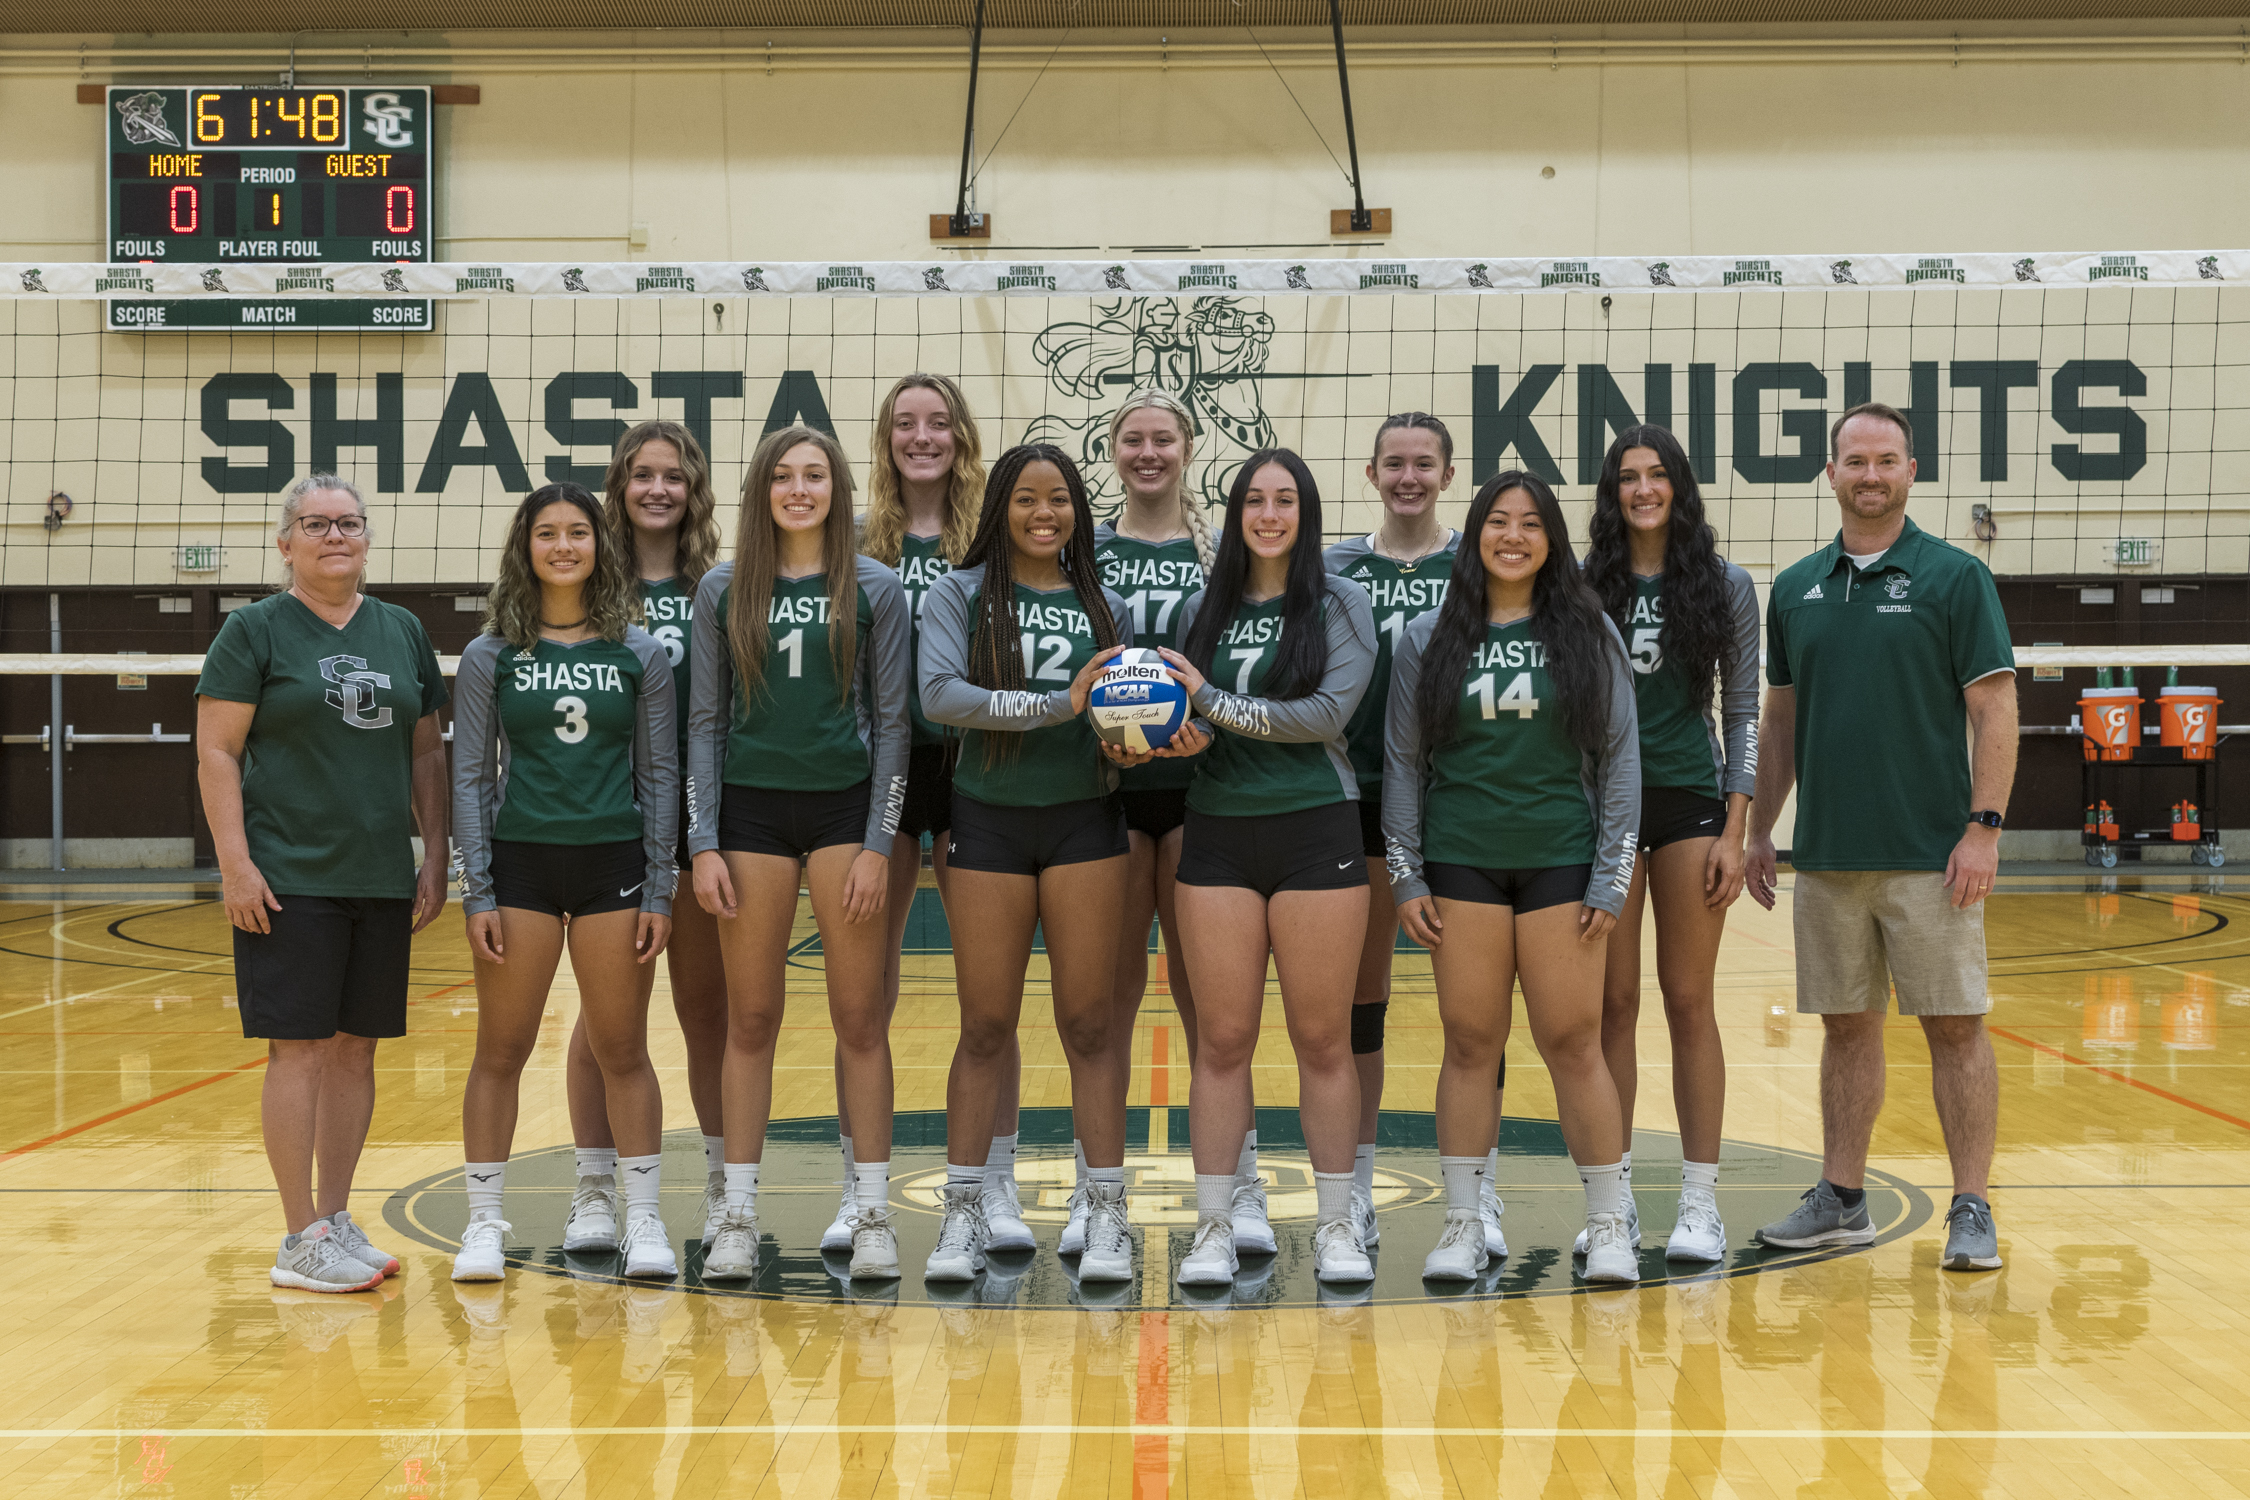 KNIGHTS FALL TO MONTEREY IN NORCAL REGIONALS